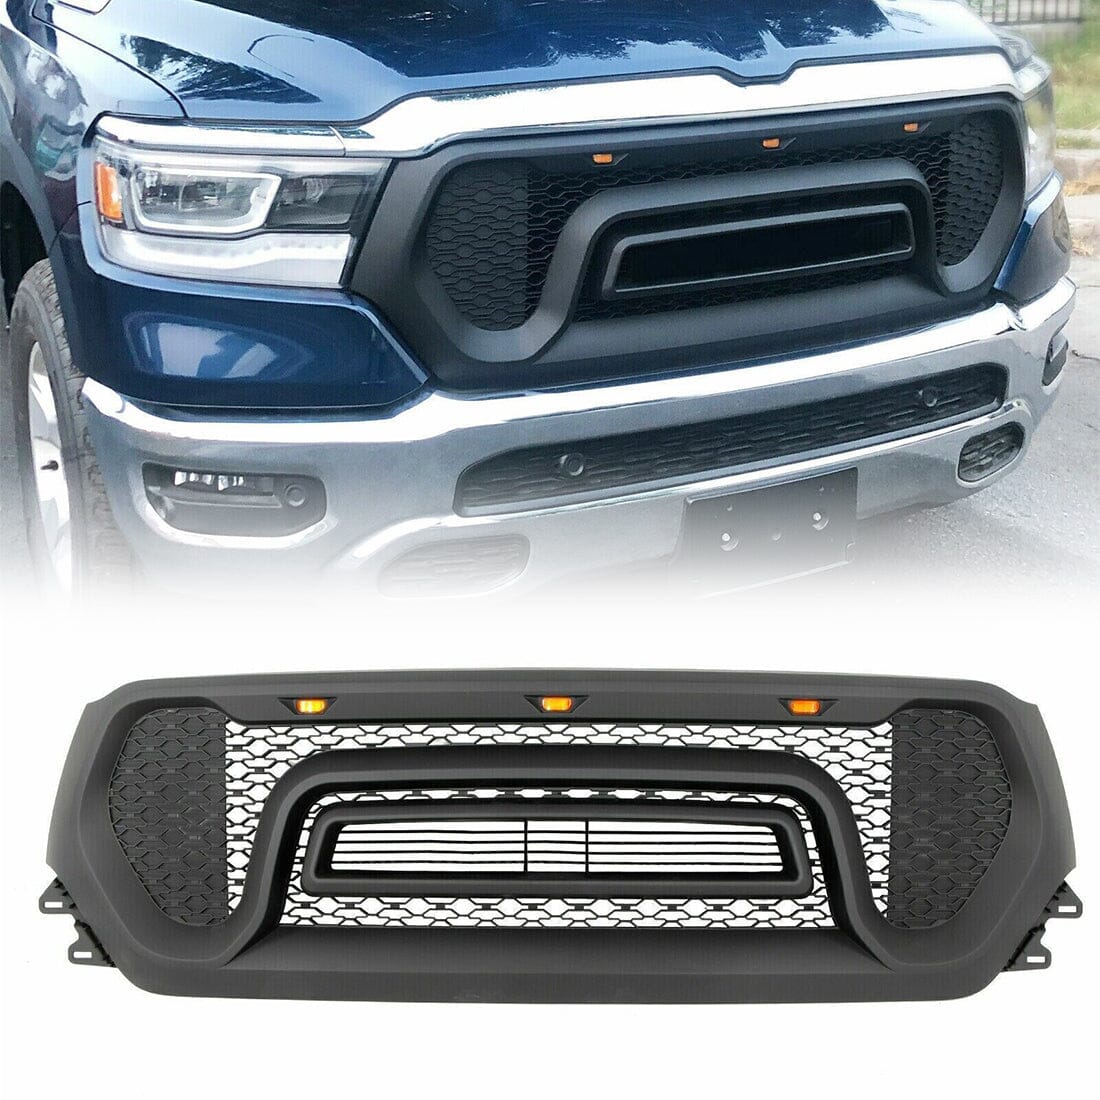 Rebel Style Front Grille W/Amber Led Lights For 2019-2020 Dodge Ram 1500 | Amoffroad